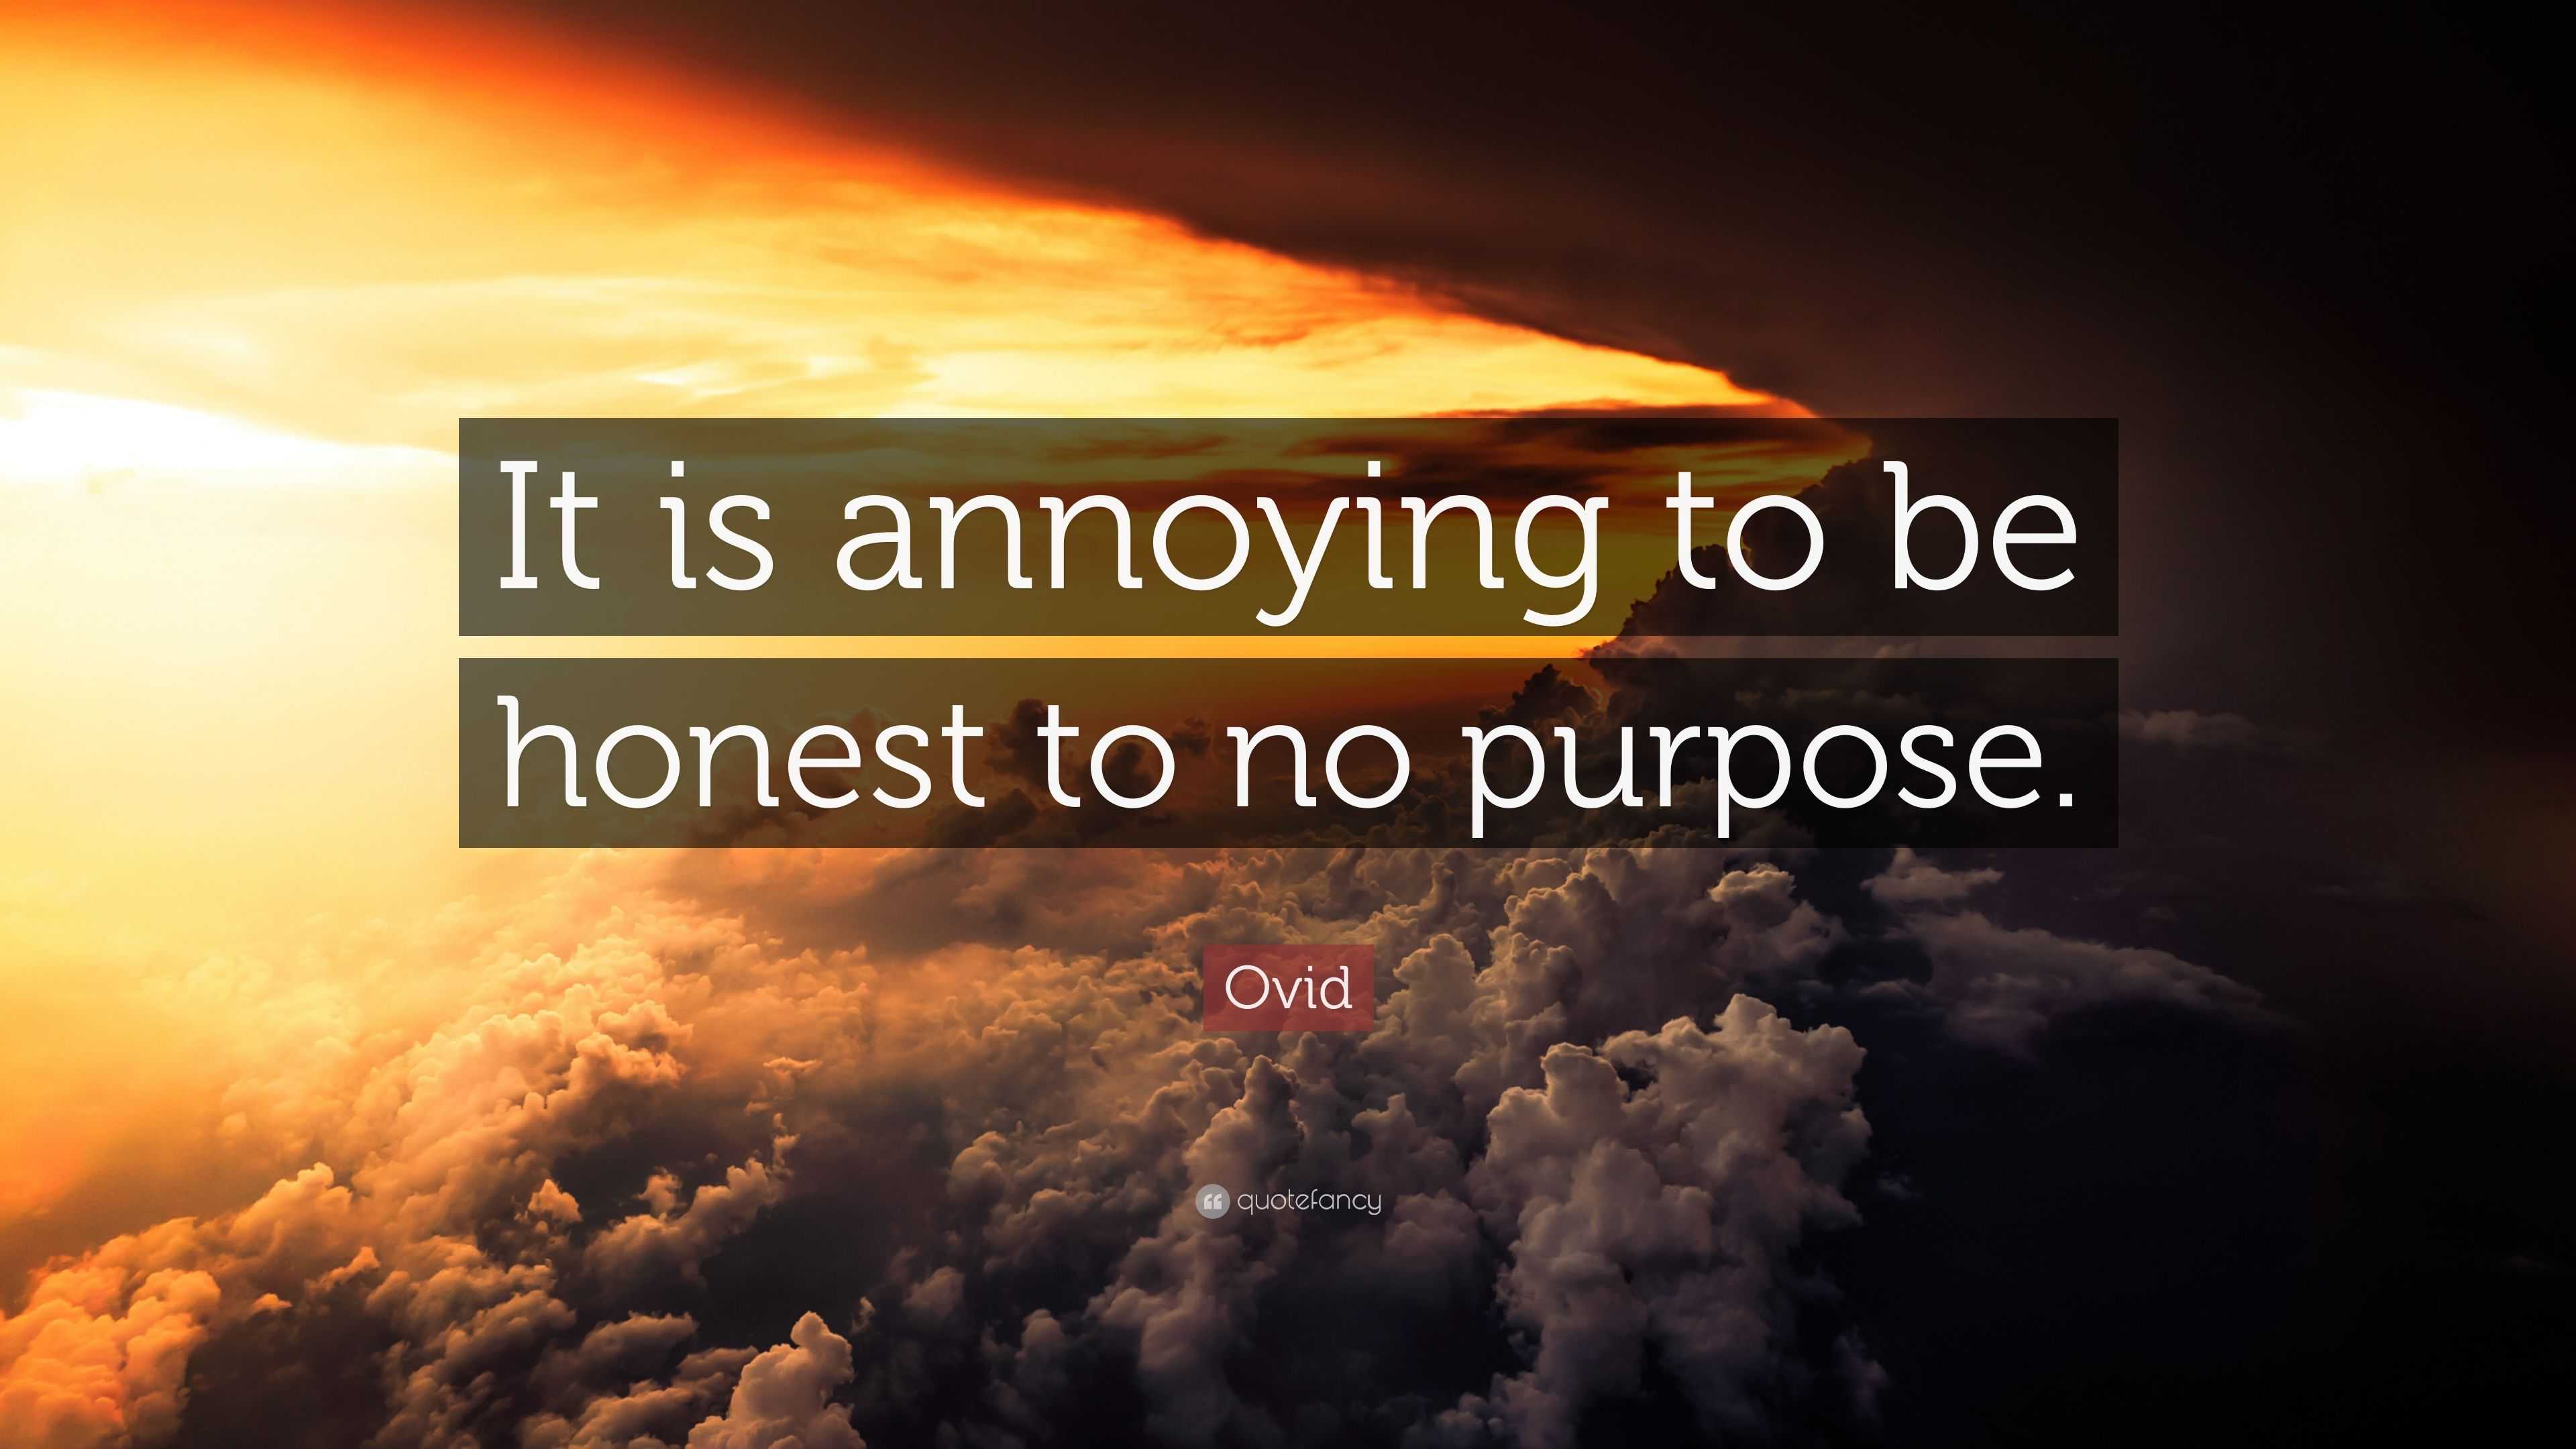 Ovid Quote “It is annoying to be honest to no purpose.”